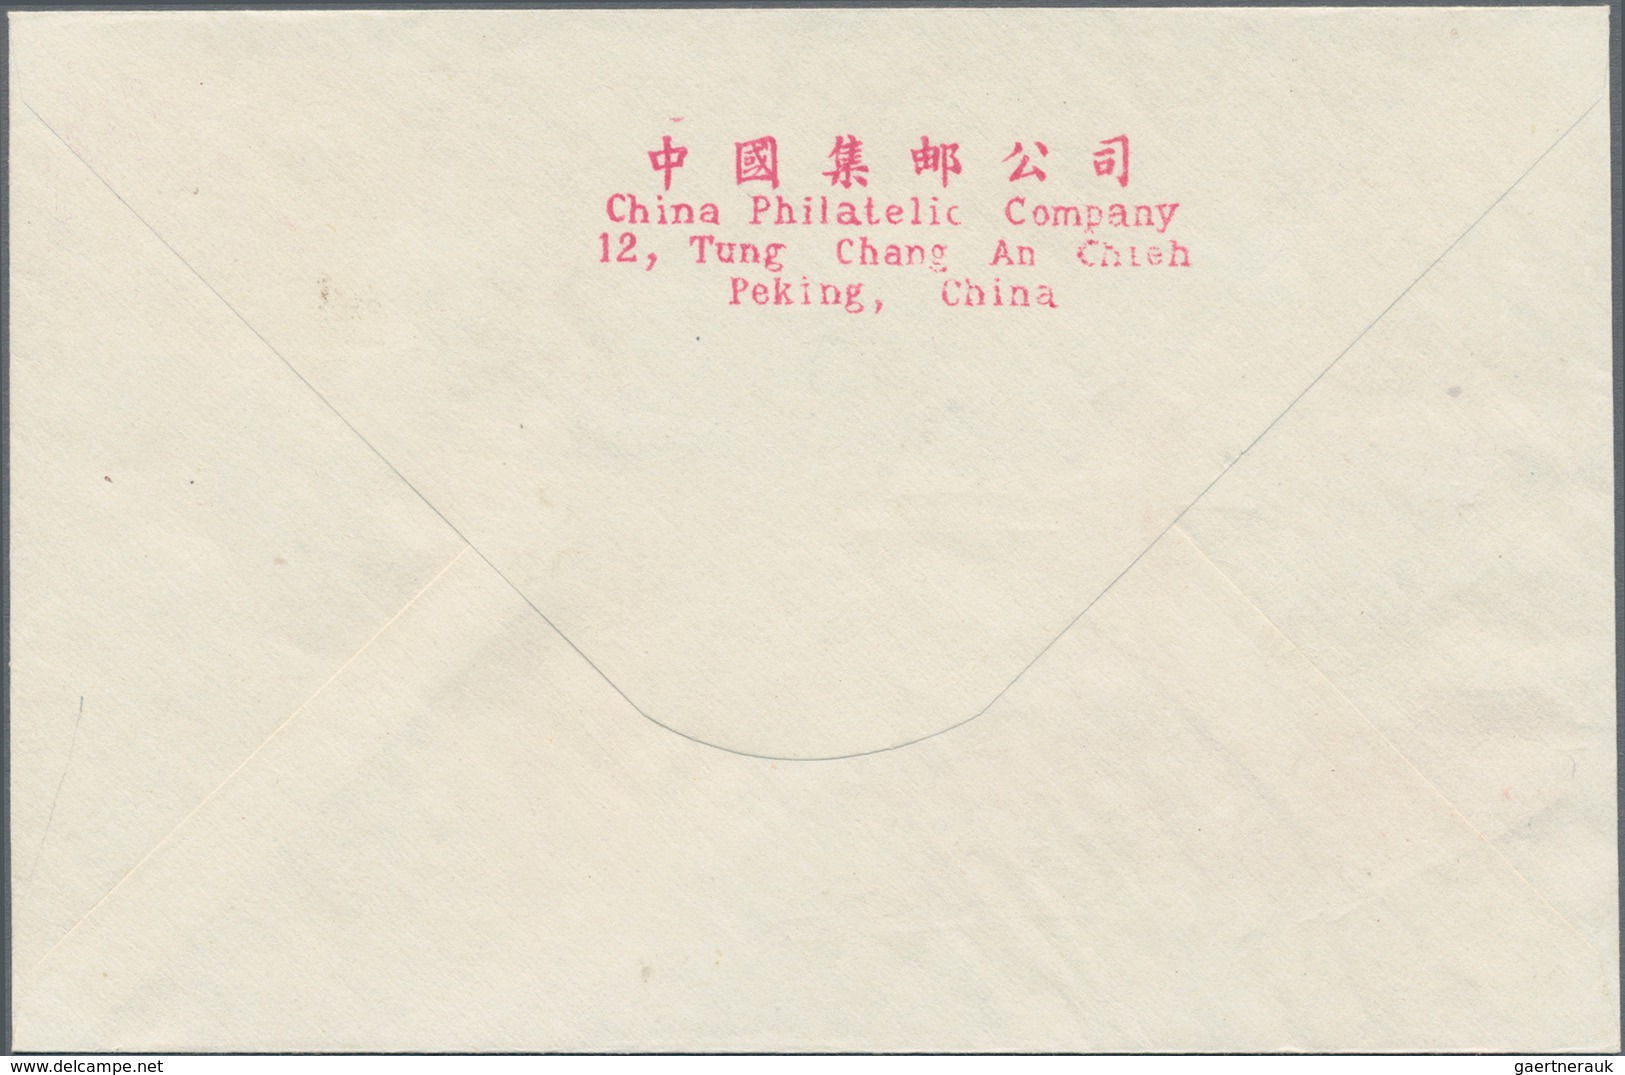 China - Volksrepublik: 1958, 5 FDCs bearing Michel 369/78 (S22, C46, C47, C48, C49), tied by first d